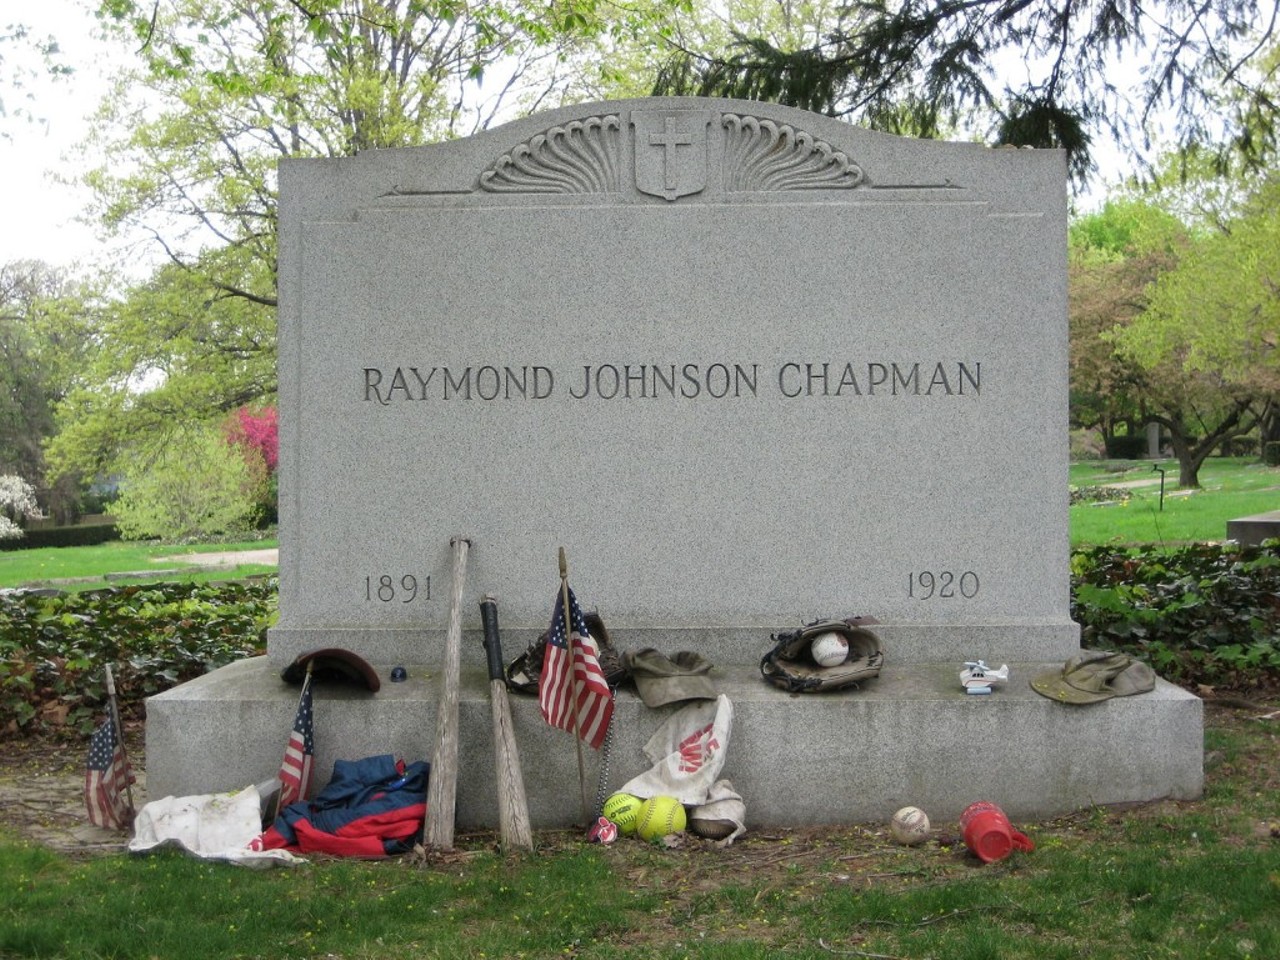 Raymond Johnson Chapman (1891-1920) - Lakeview Cemetery
Raymond was a Cleveland Indians' shortstop, and the only player in Major League history to die from being hit by a pitch. Today, his gravestone is adorned with baseball memorabilia. (Photo via Wikimedia)